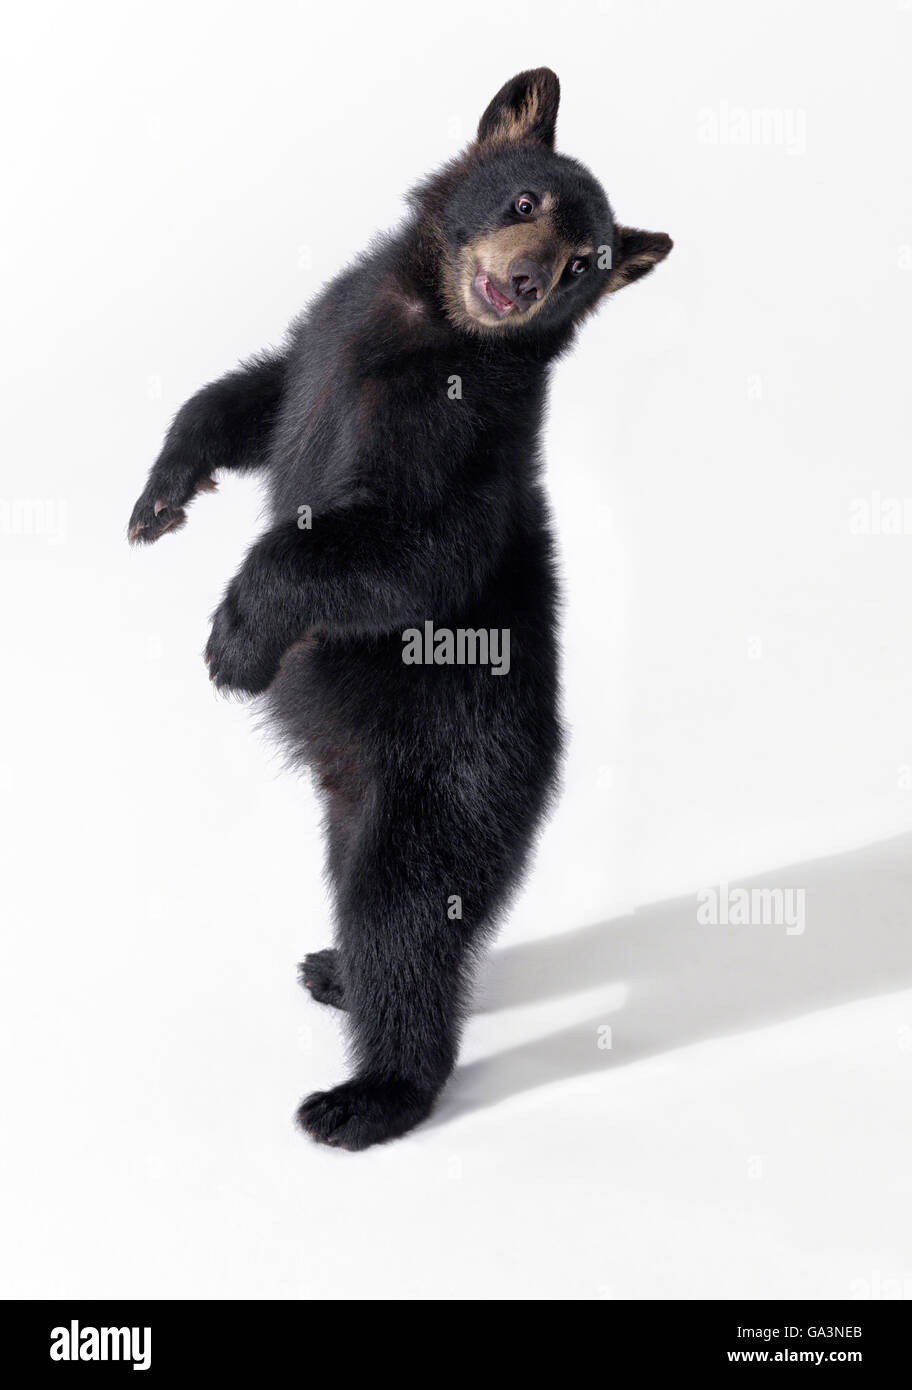 Black bear cub standing on hind legs and looking over his shoulder on white background. Stock Photo